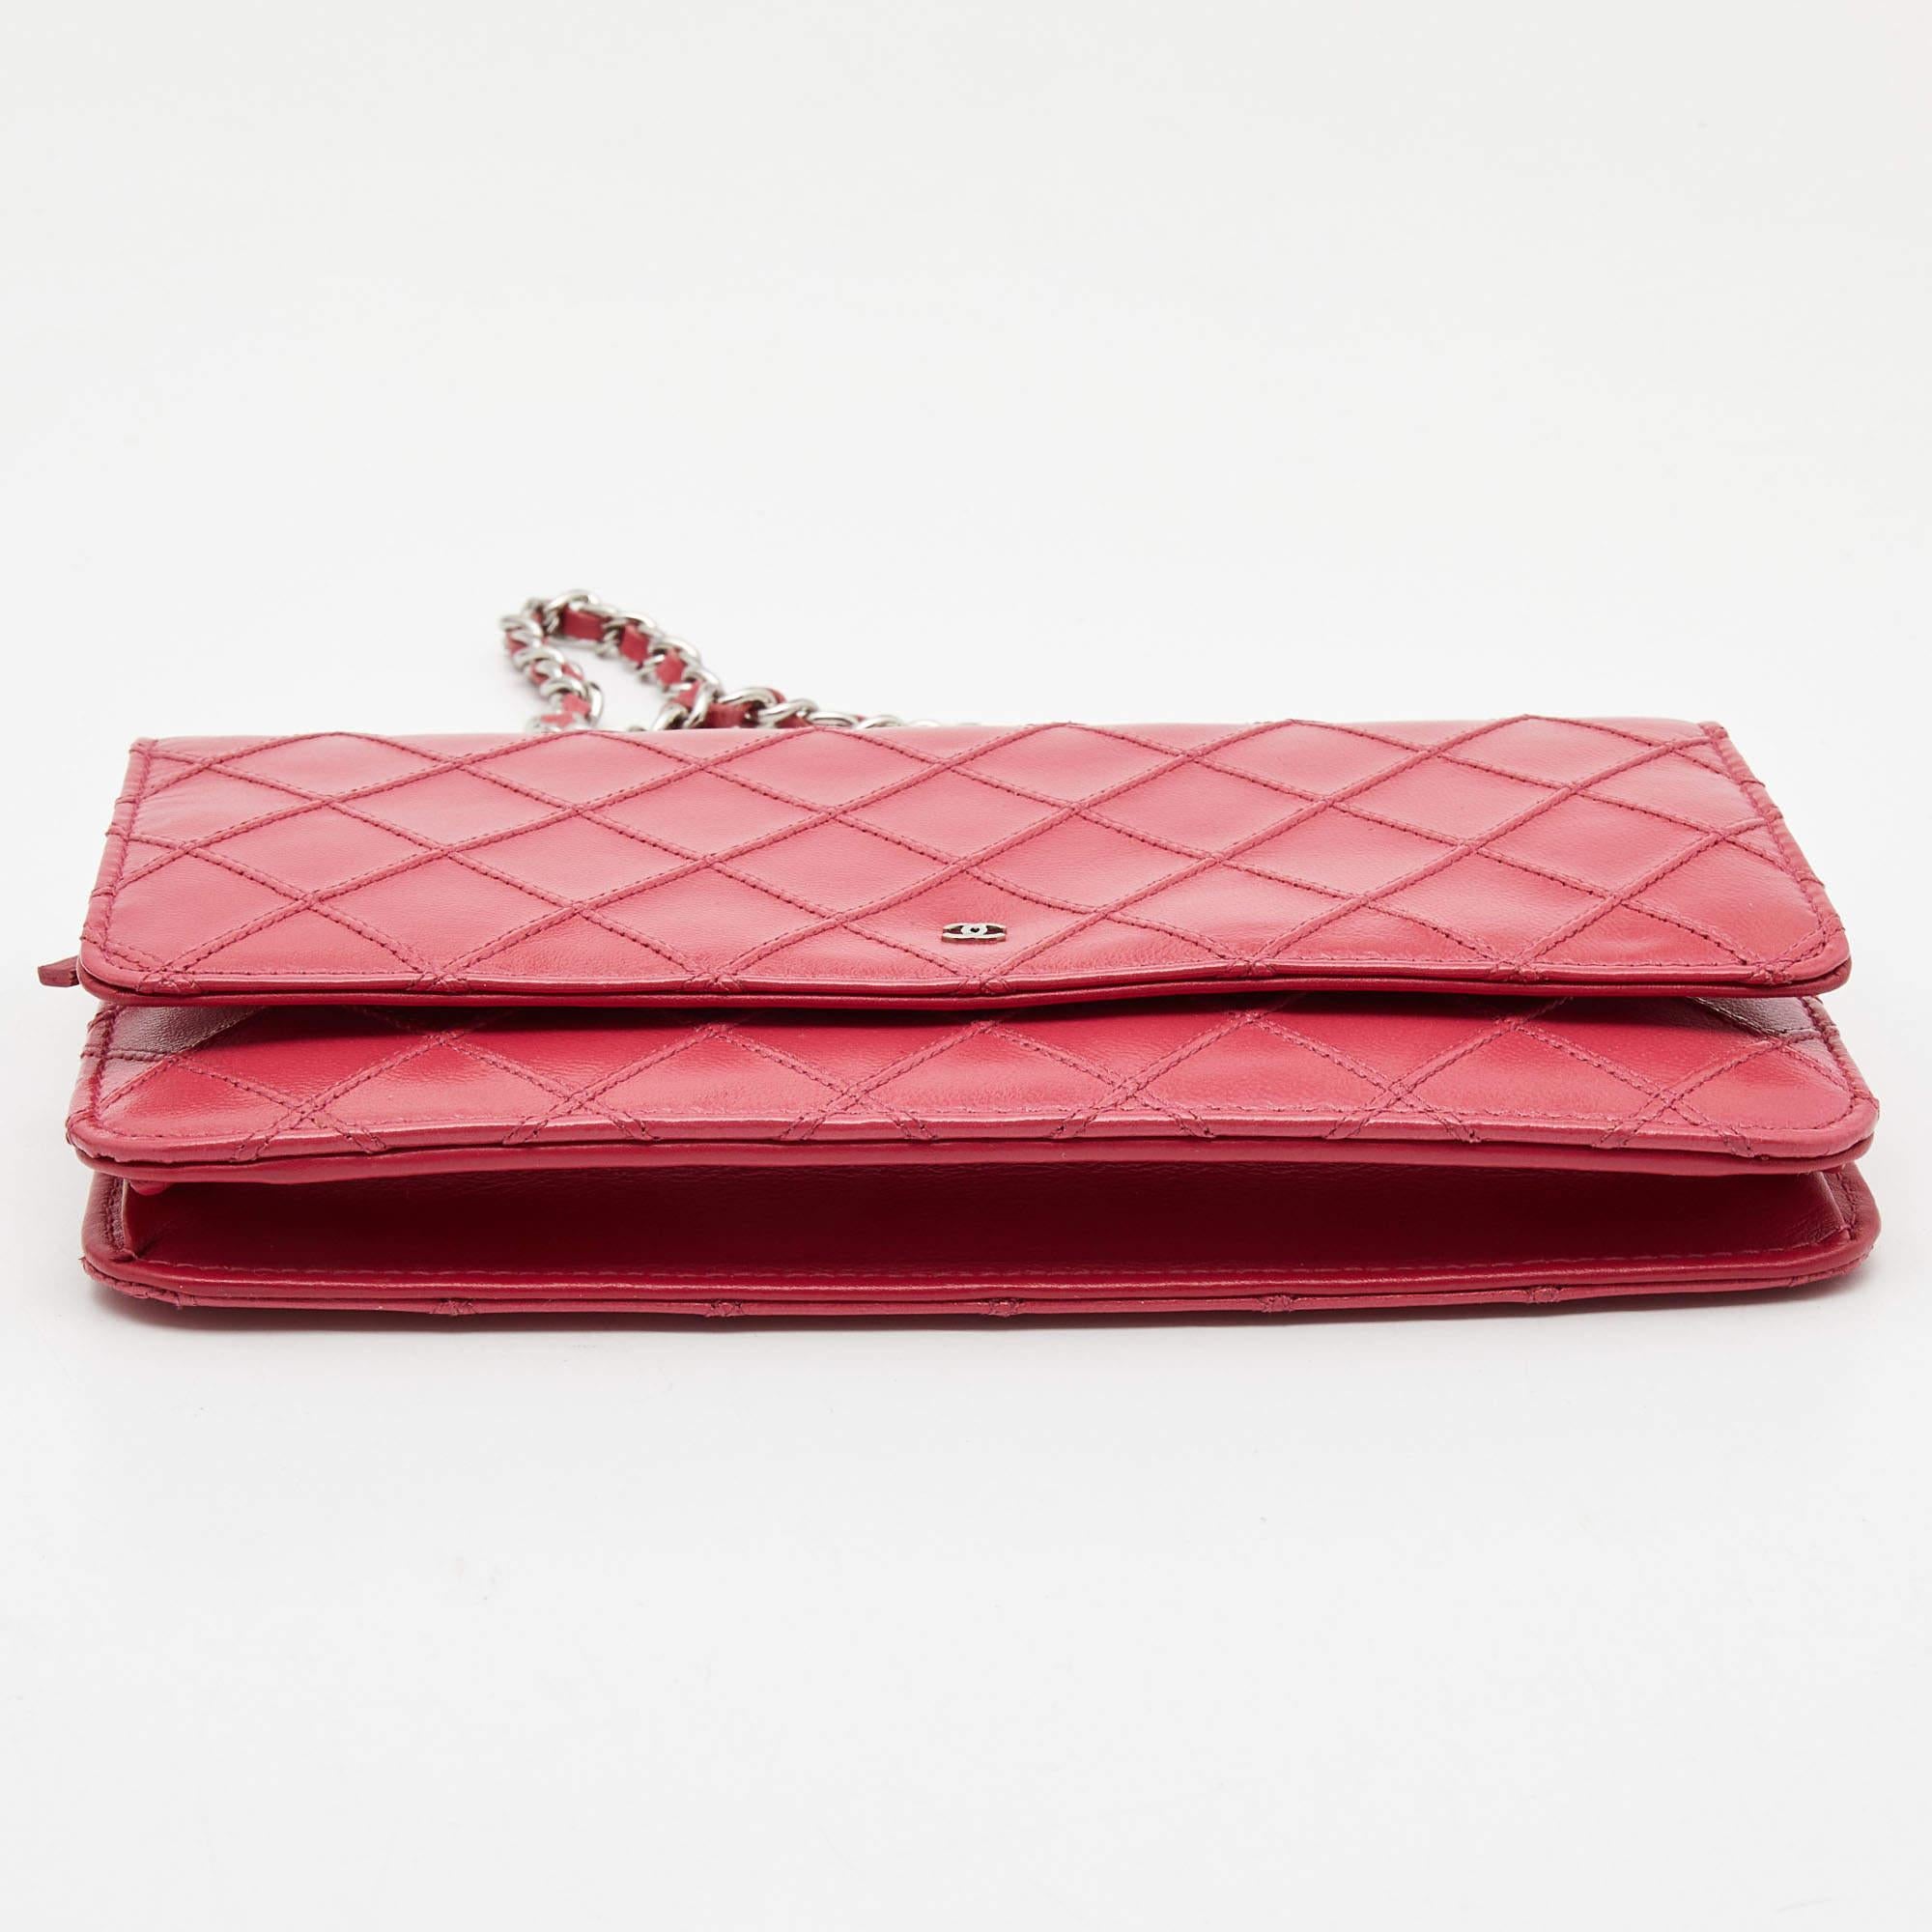 Chanel Pink Quilted Leather WOC Bag In Excellent Condition For Sale In Dubai, Al Qouz 2